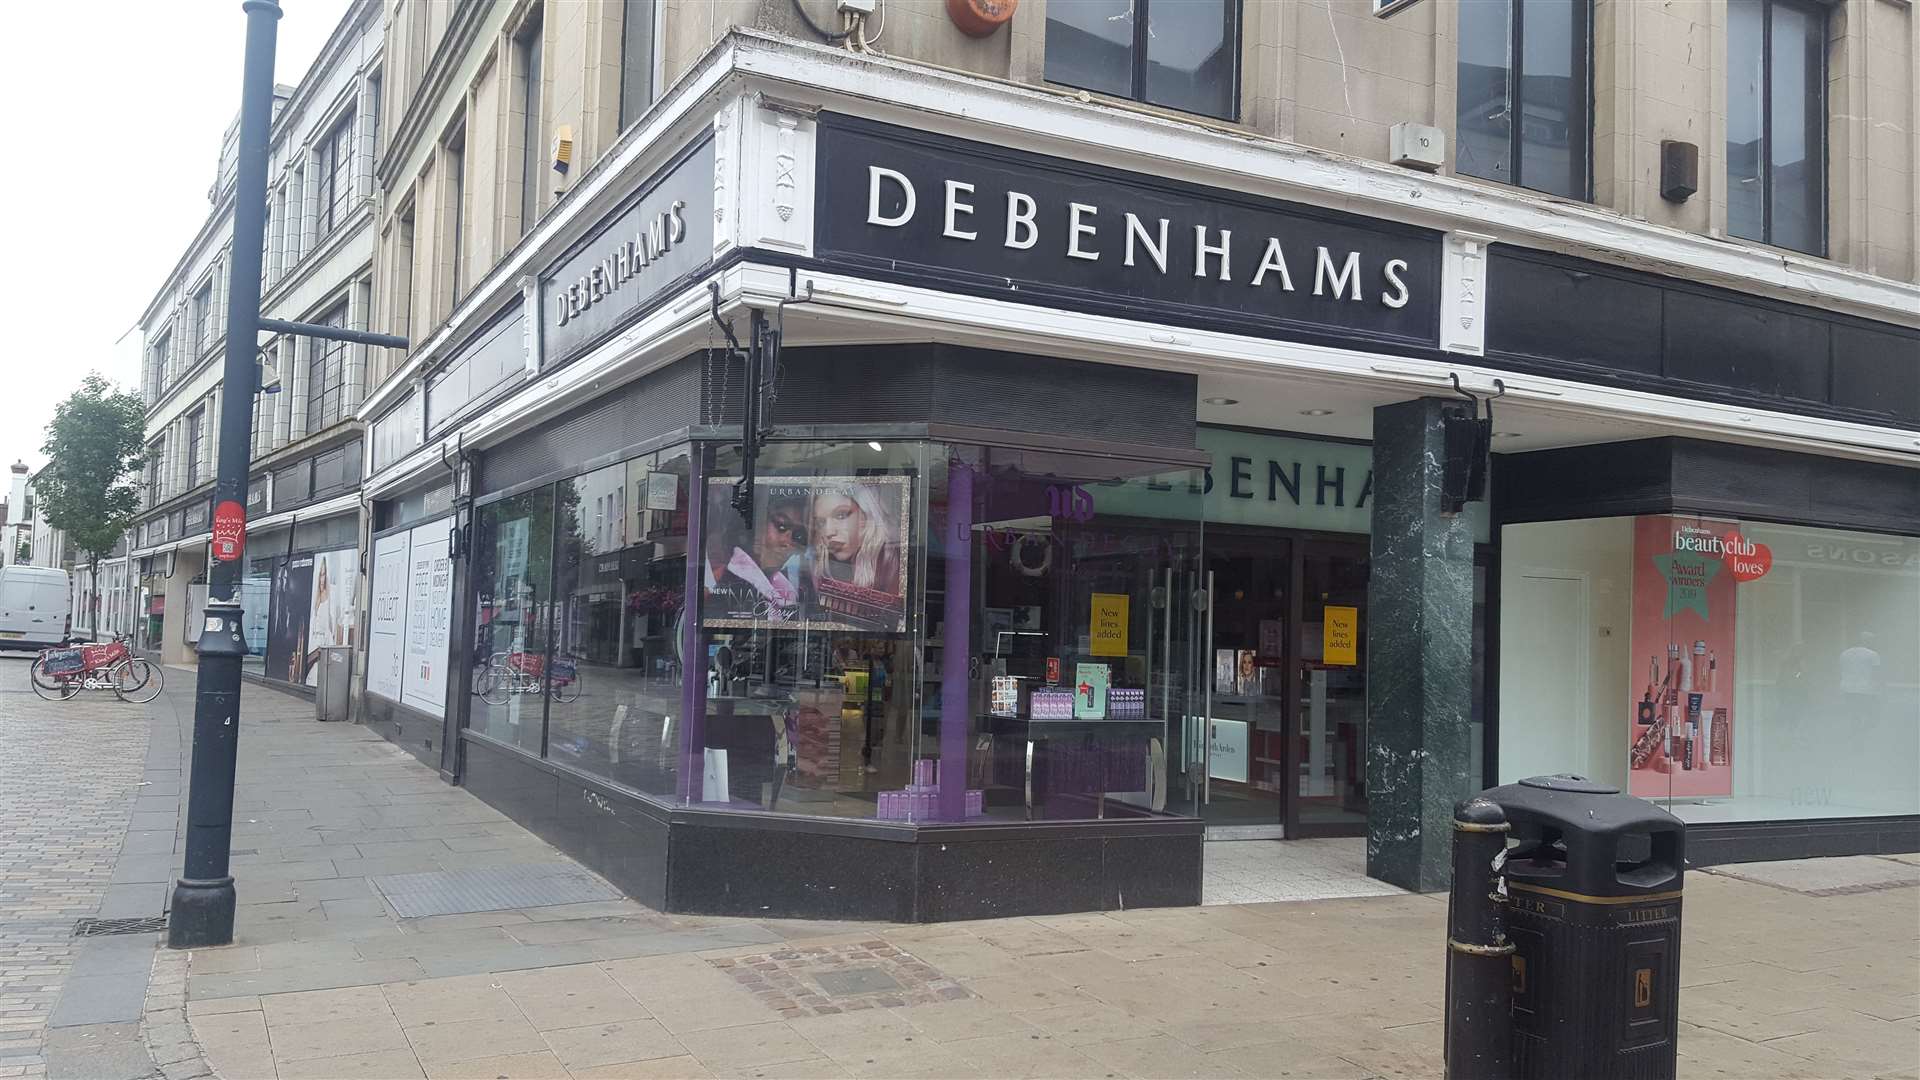 Debenhams will soon be closing but plans for the building's redevelopment are already being planned